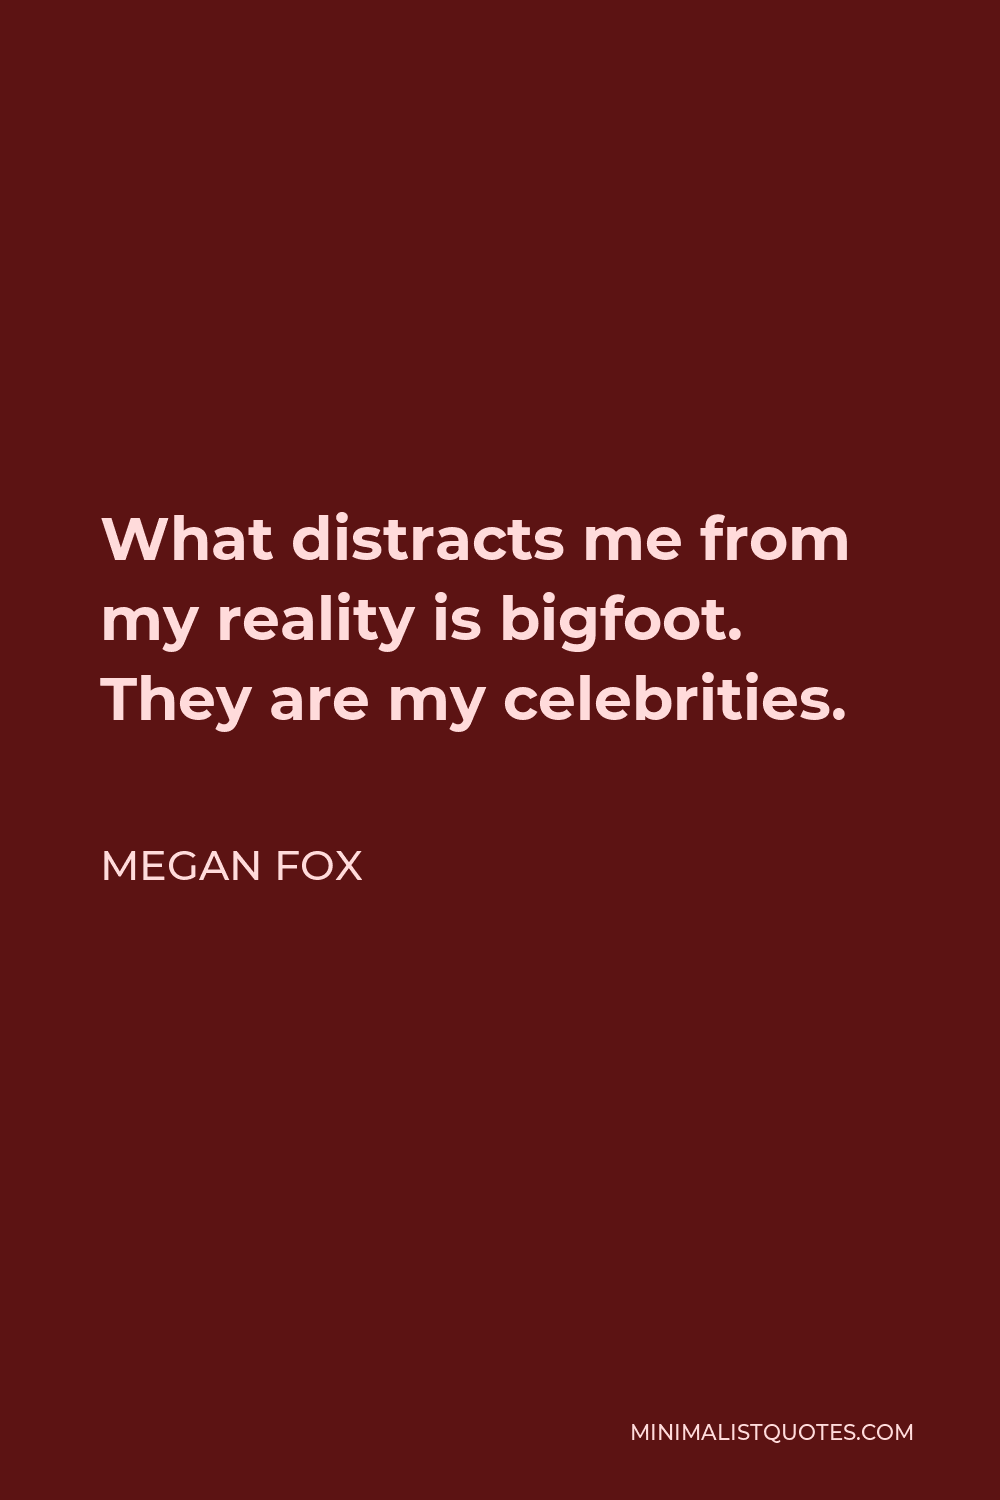 Megan Fox Quote - What distracts me from my reality is bigfoot. They are my celebrities.